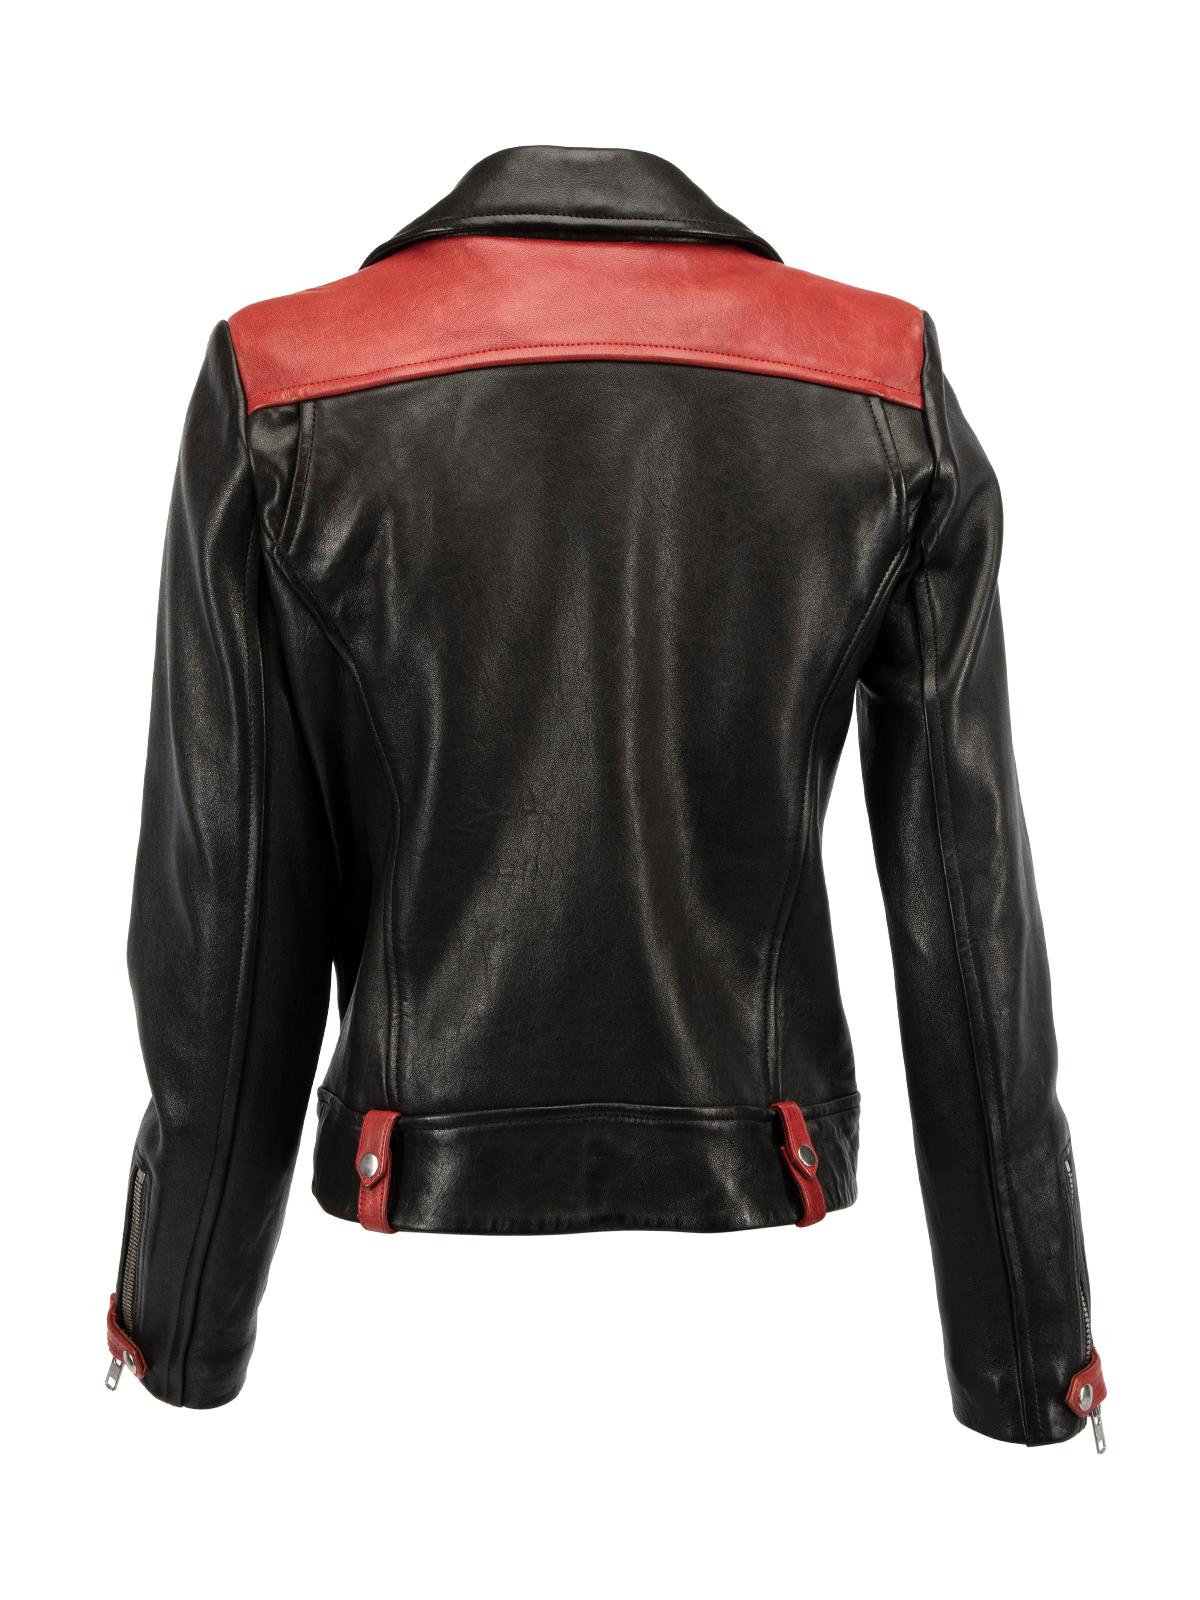 leather jacket with red lining